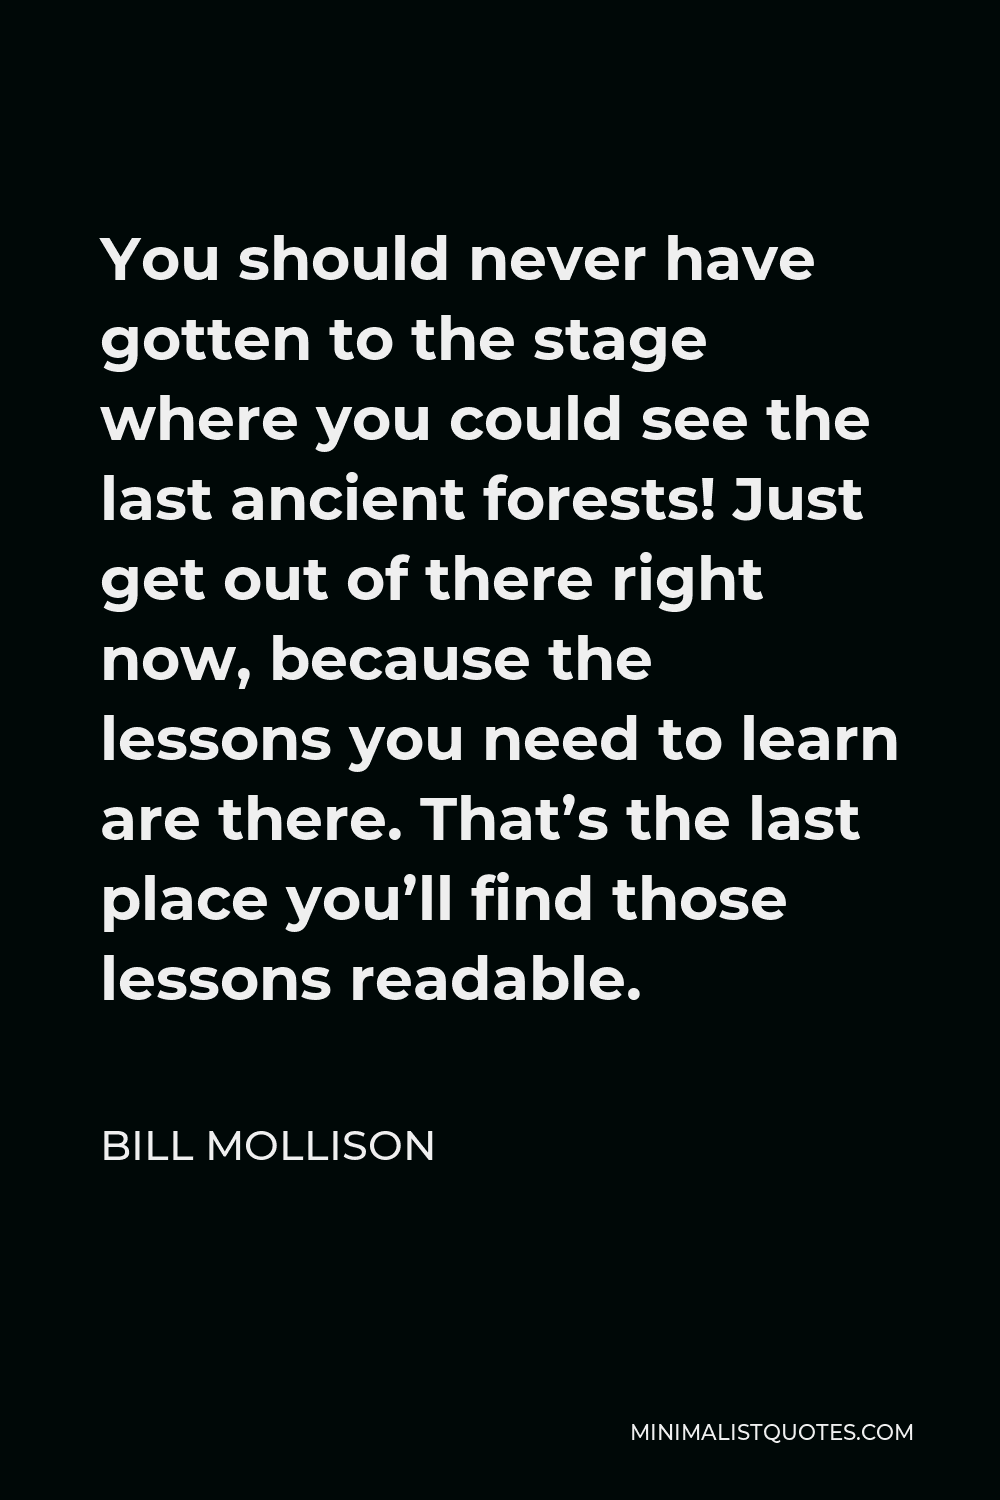 Bill Mollison Quote - You should never have gotten to the stage where you could see the last ancient forests! Just get out of there right now, because the lessons you need to learn are there. That’s the last place you’ll find those lessons readable.